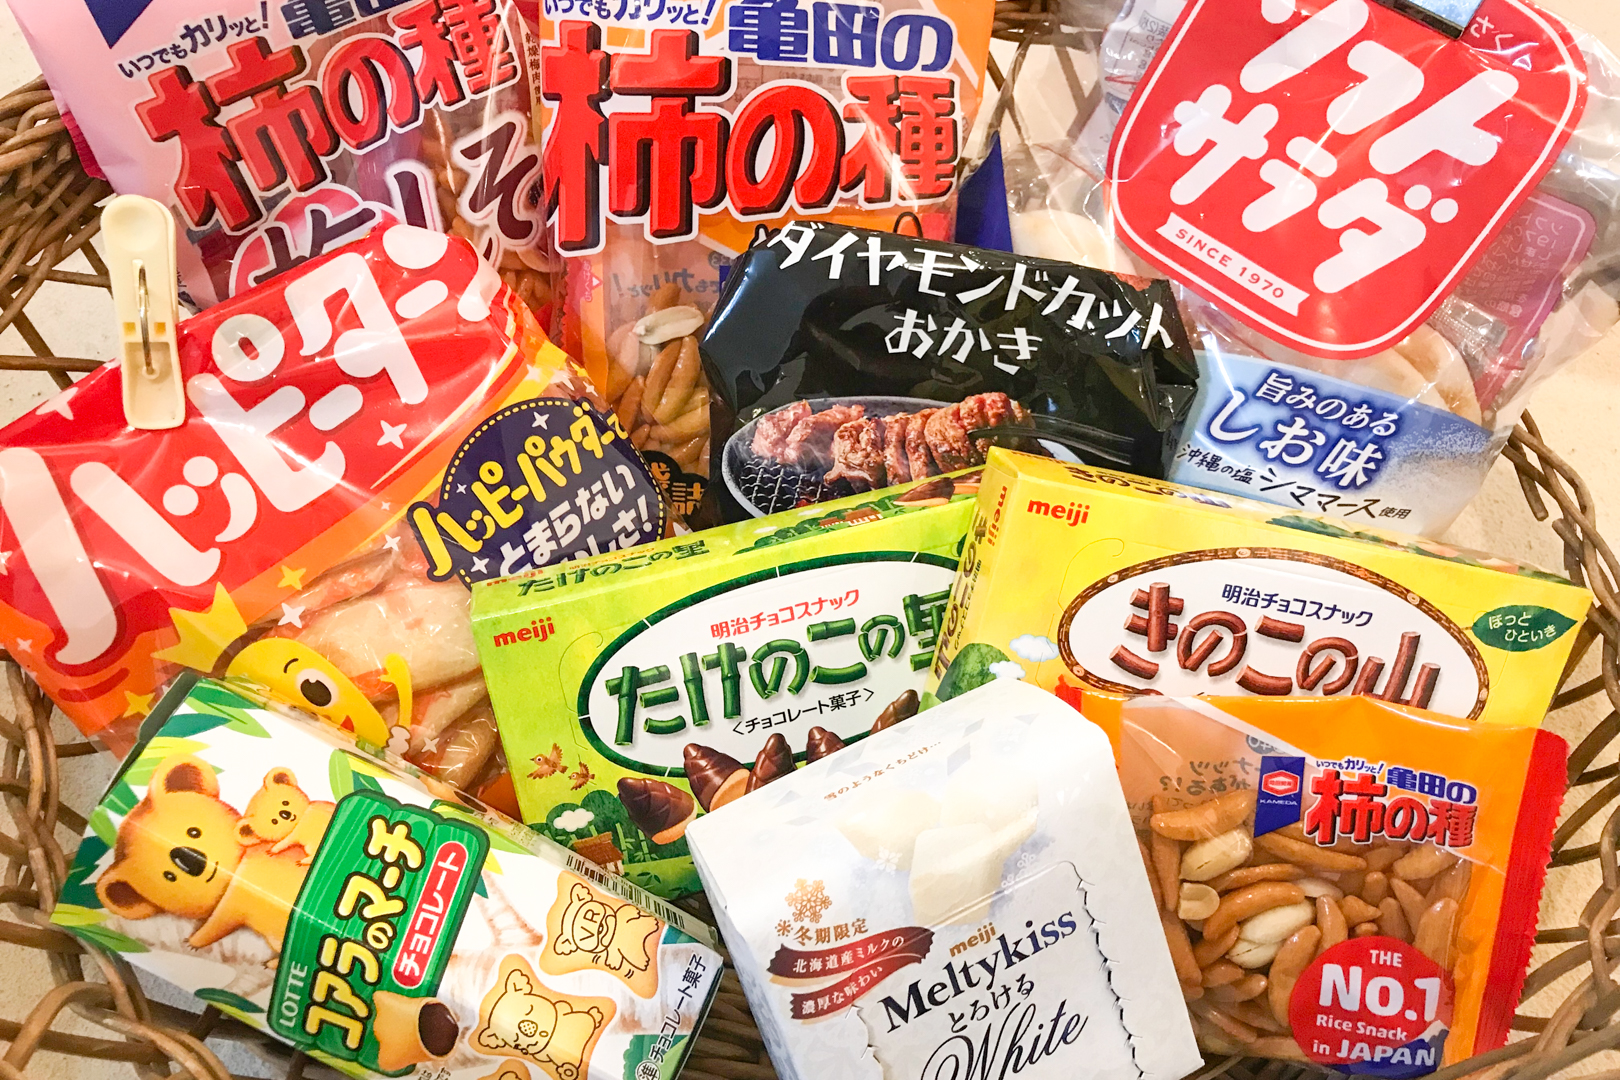 Popular Japanese snacks: A range of Japanese supermarket snacks in a cane basket - from cookies to chocolate, chips and rice crackers.